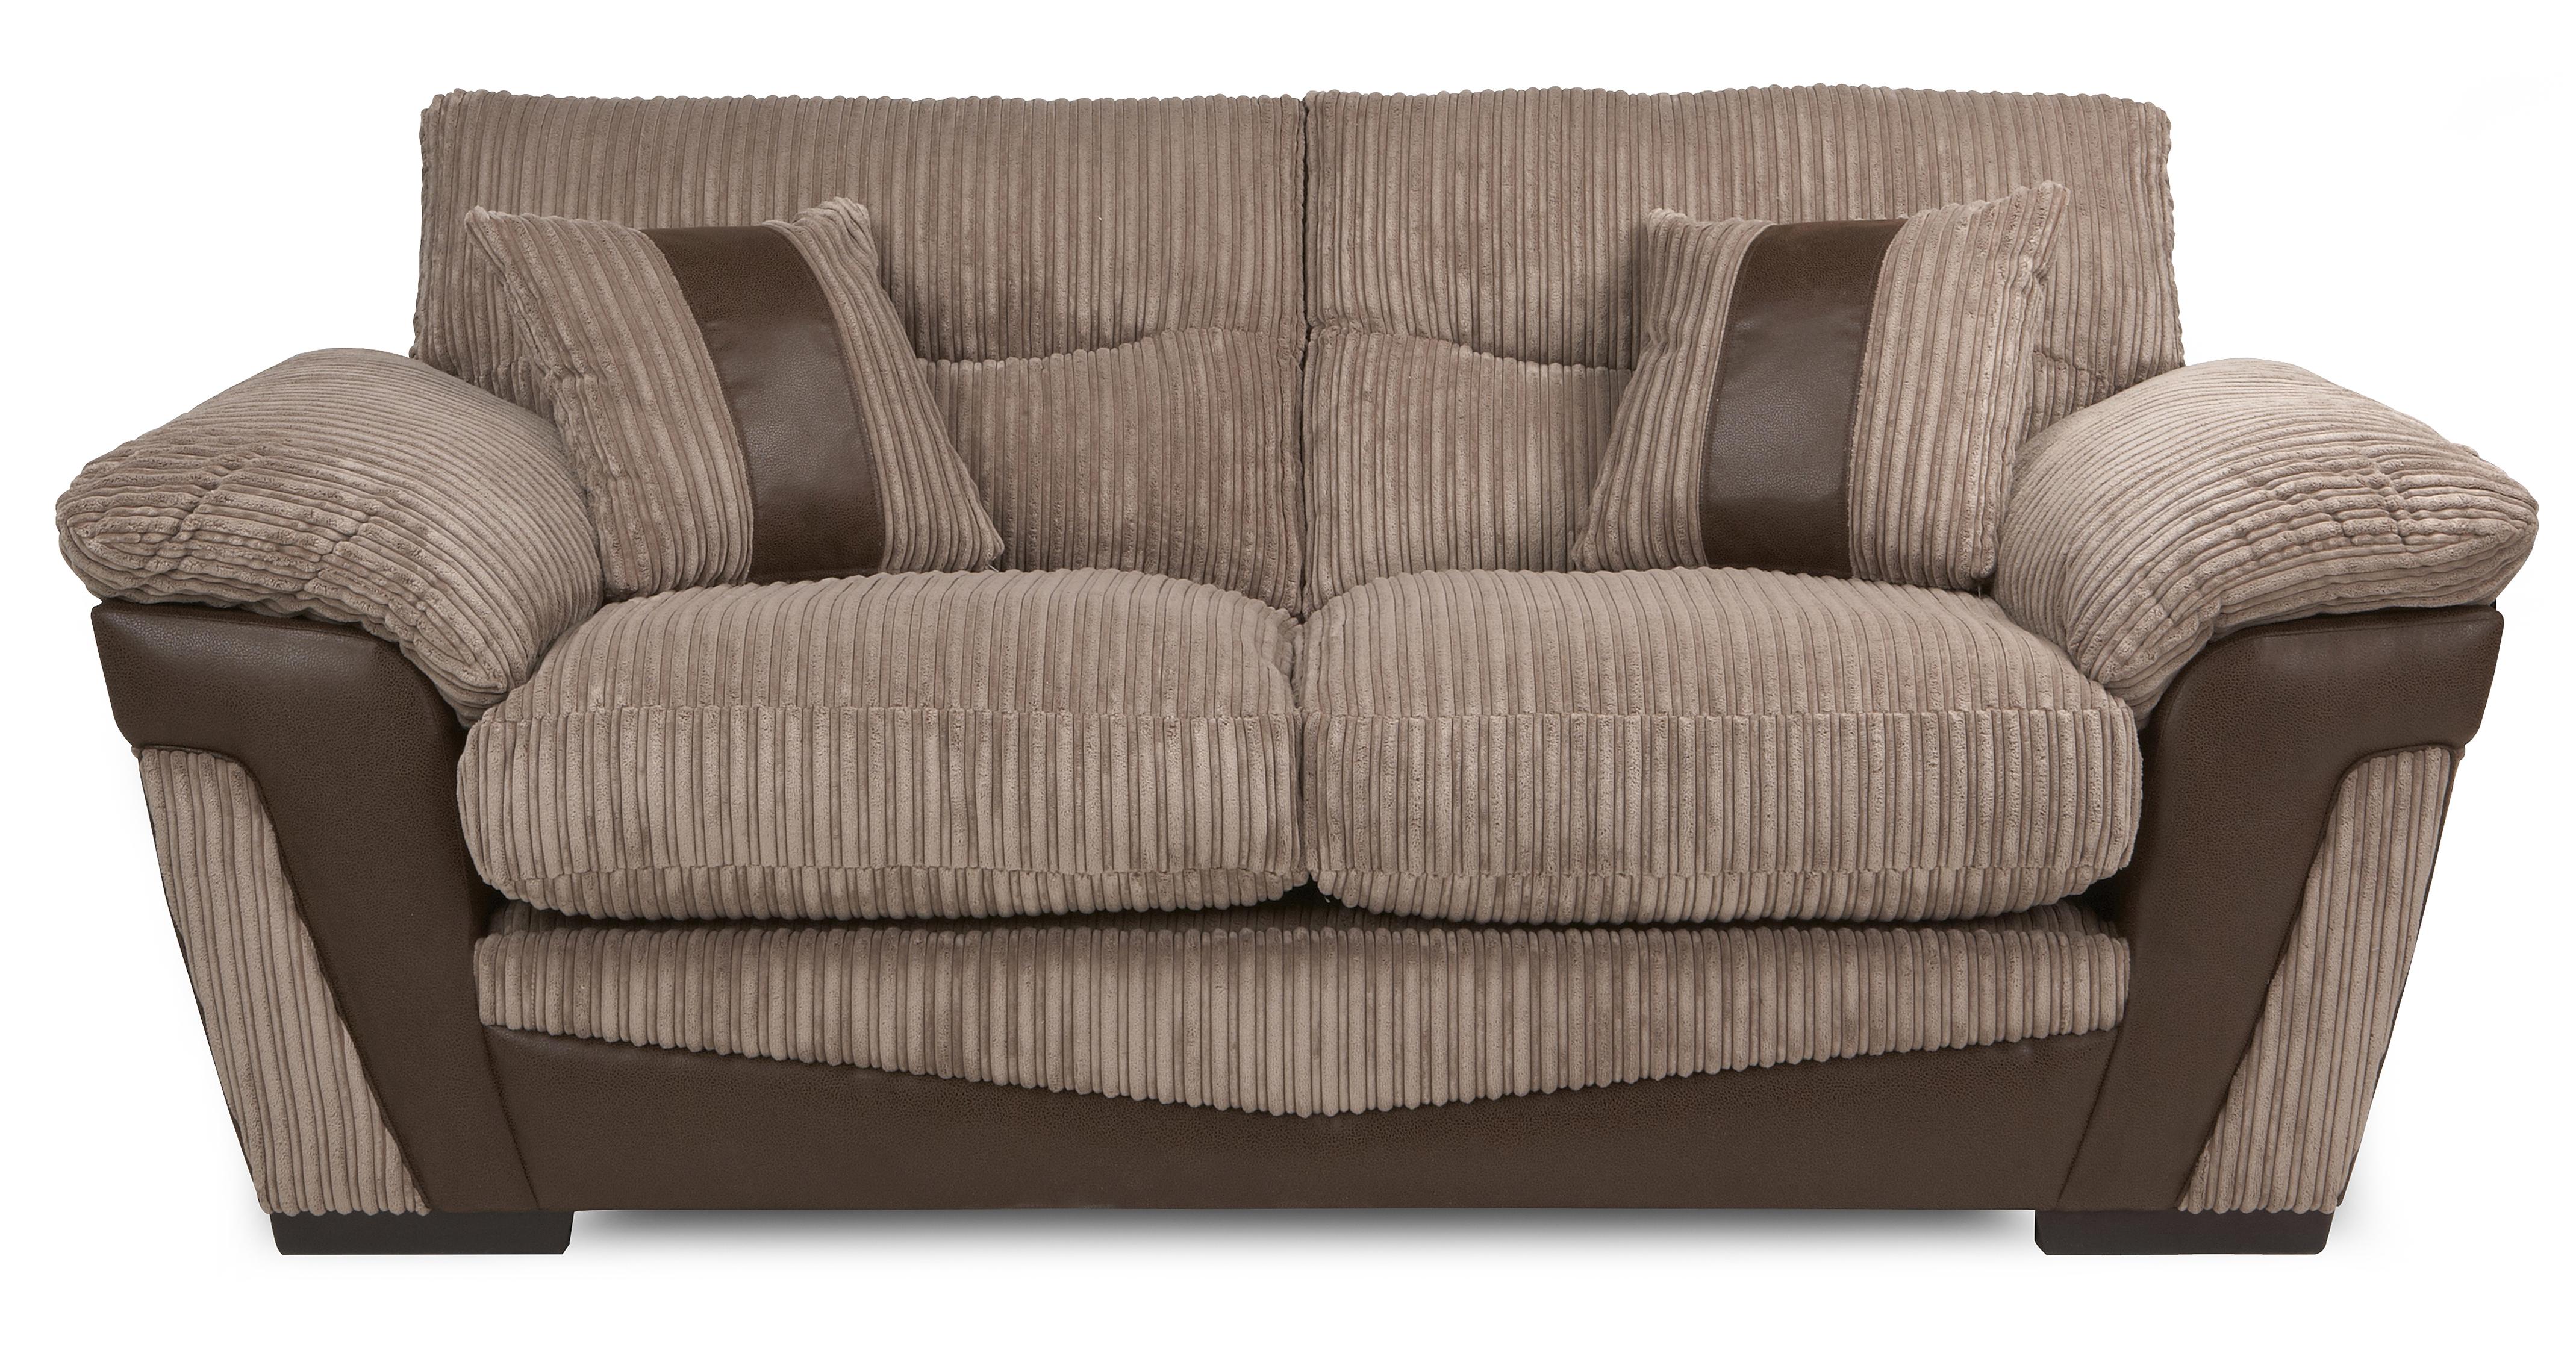 dfs sofa bed fabric